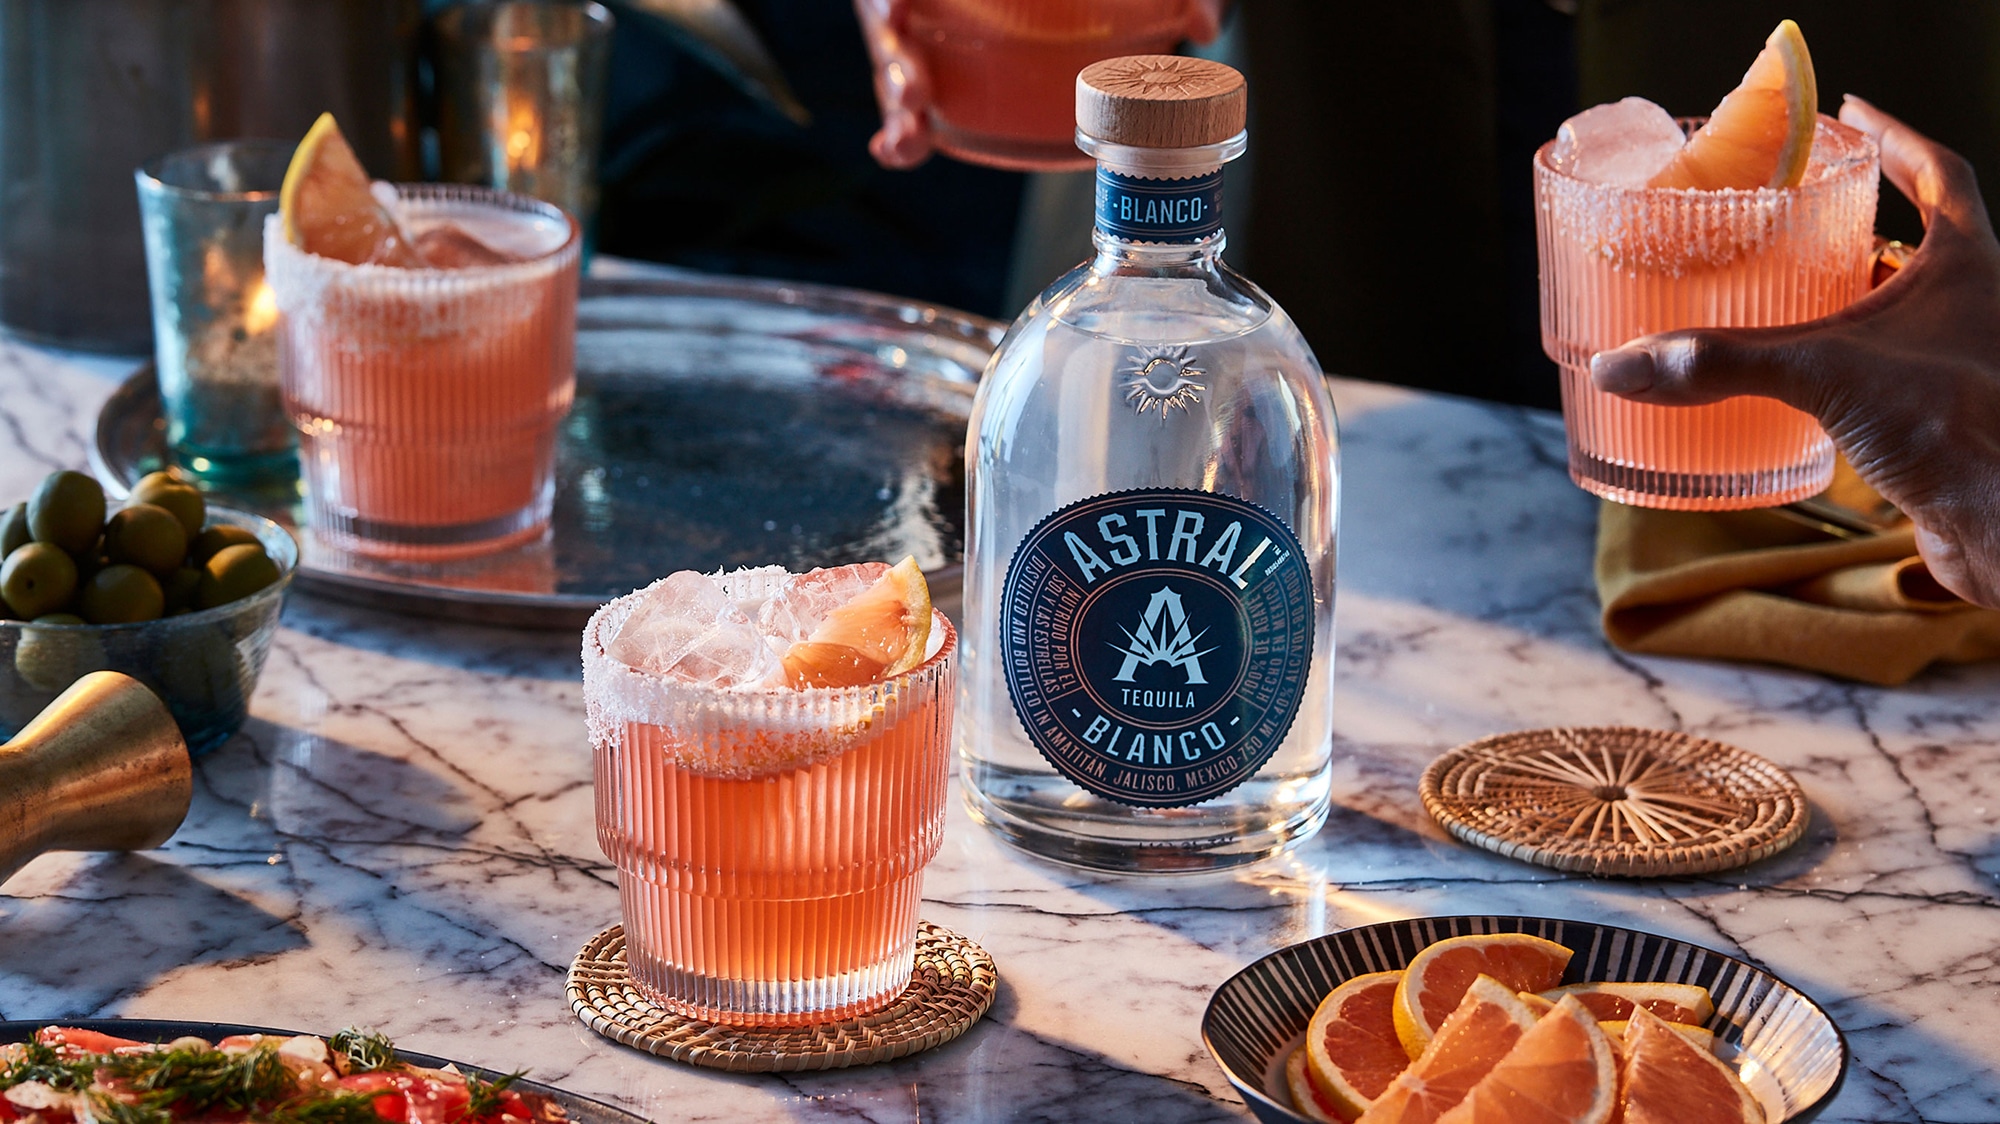 Astral Tequila cocktails